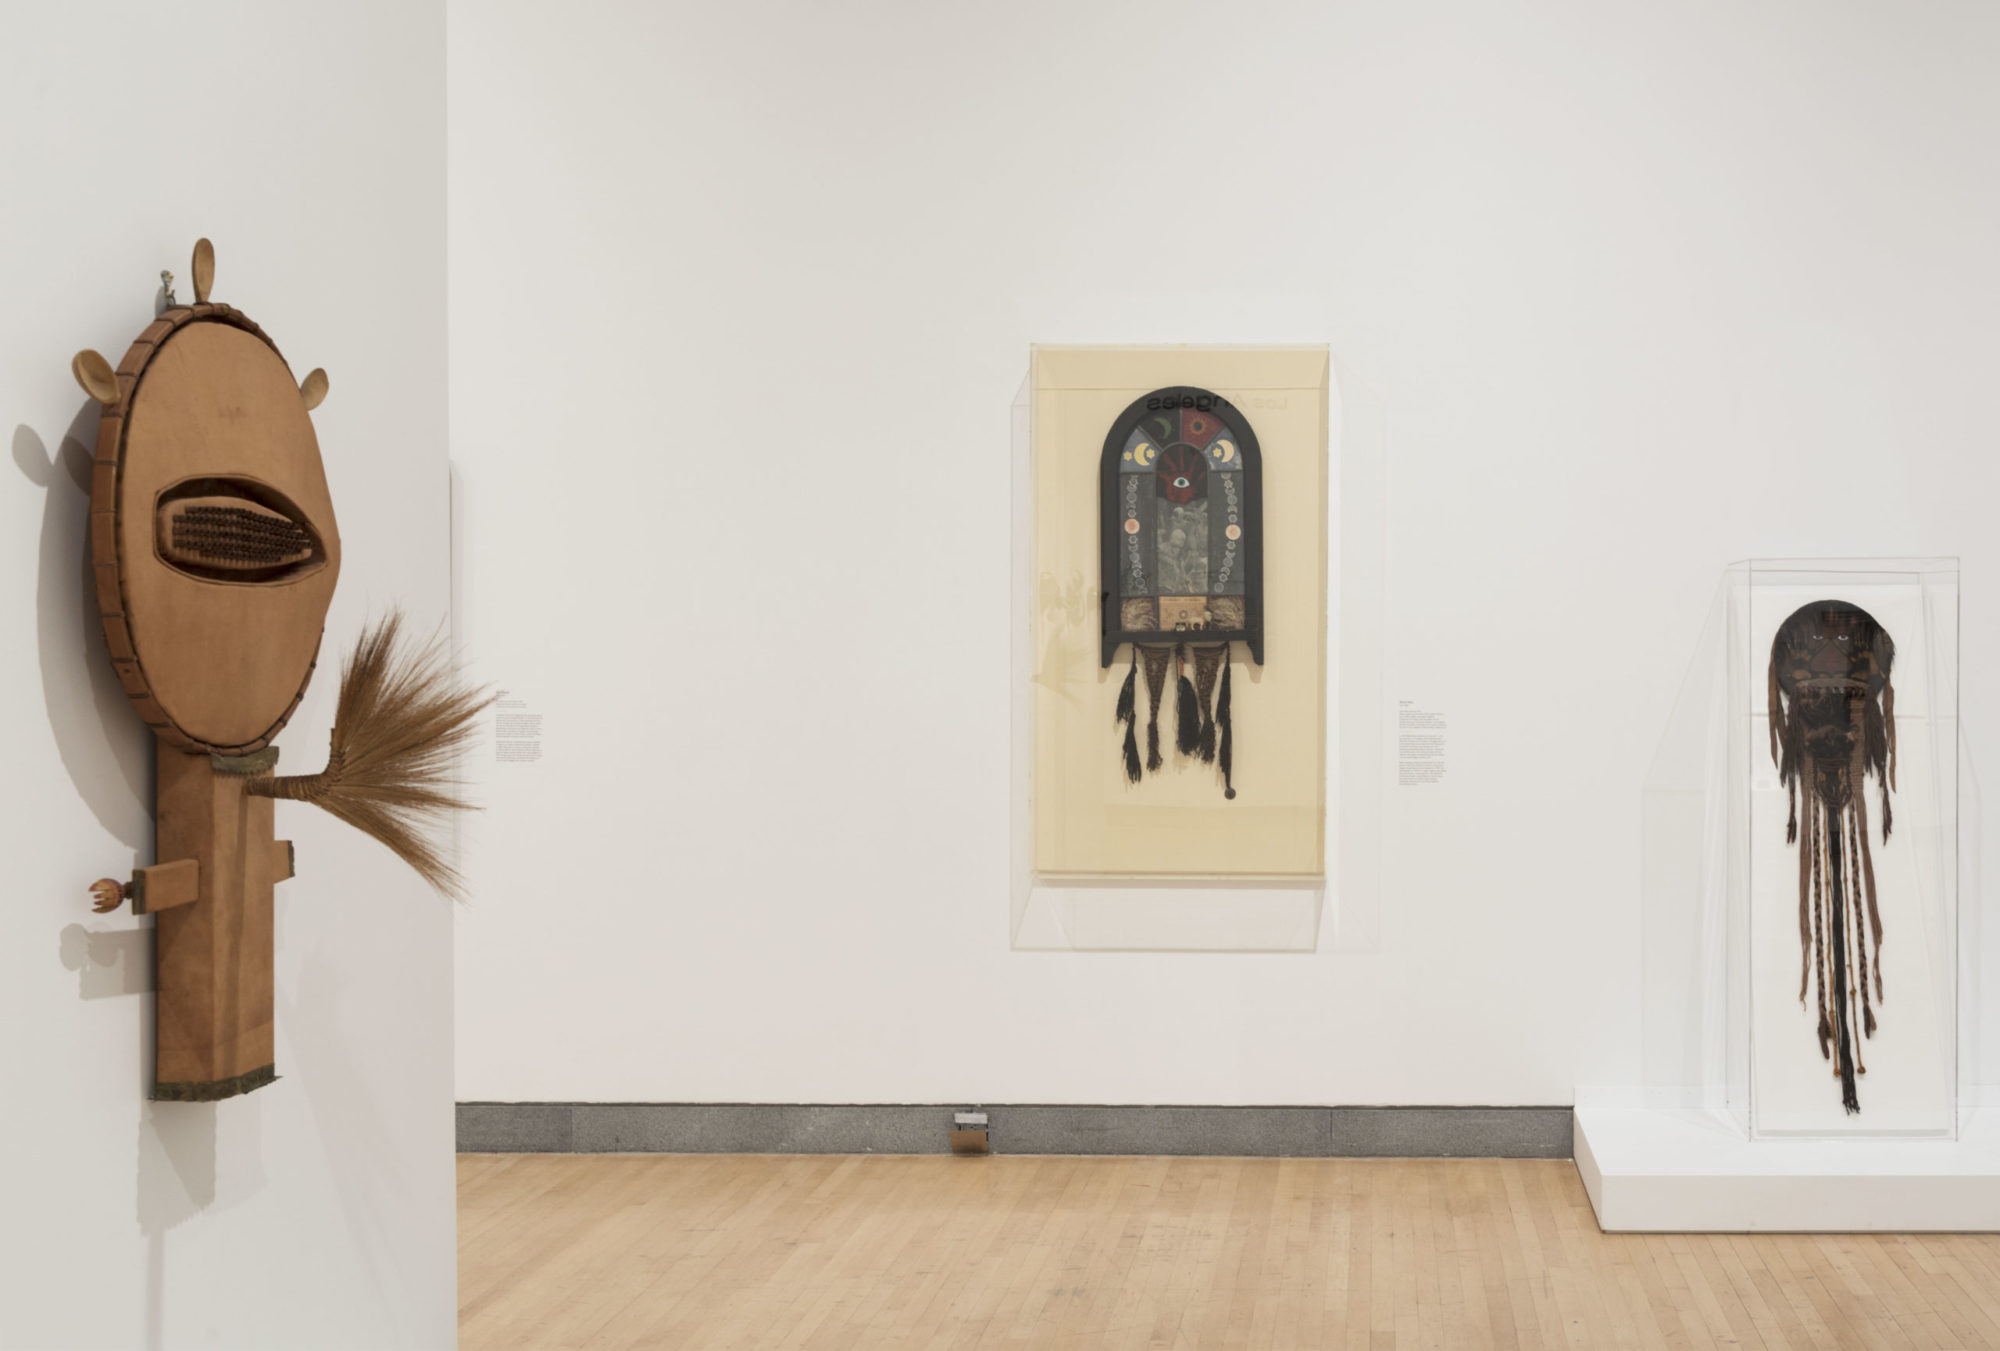 Installation view of 'Soul of a Nation;' three works featuring natural objects such as cloth, feather and beads are in the foreground and background of the image